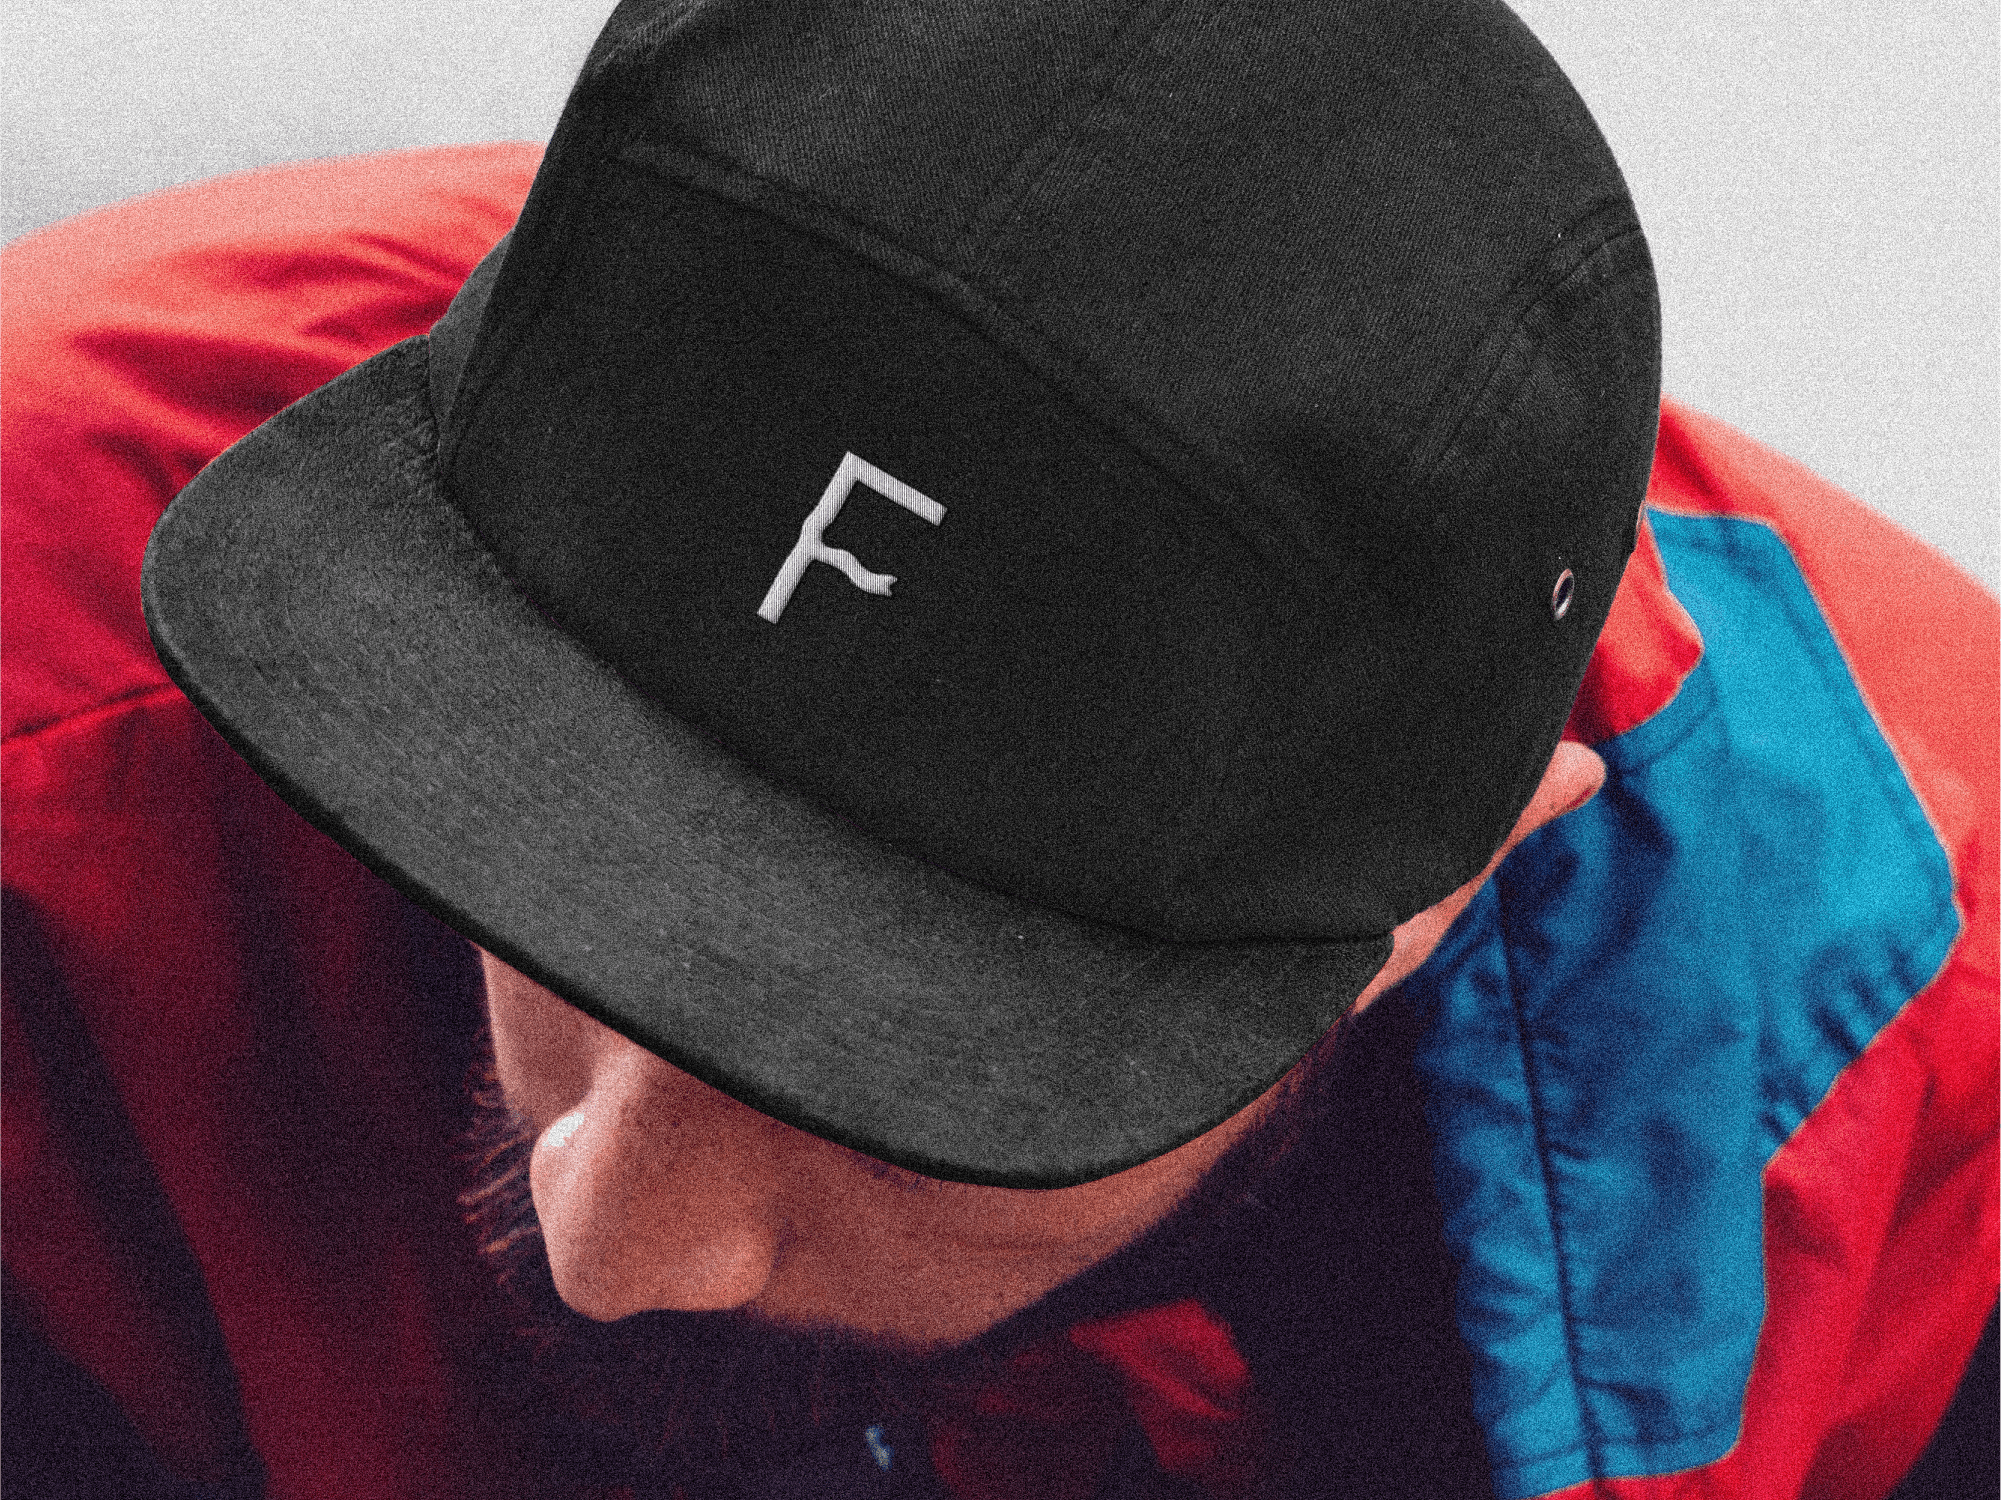 frequenhz letter mark in a black cap